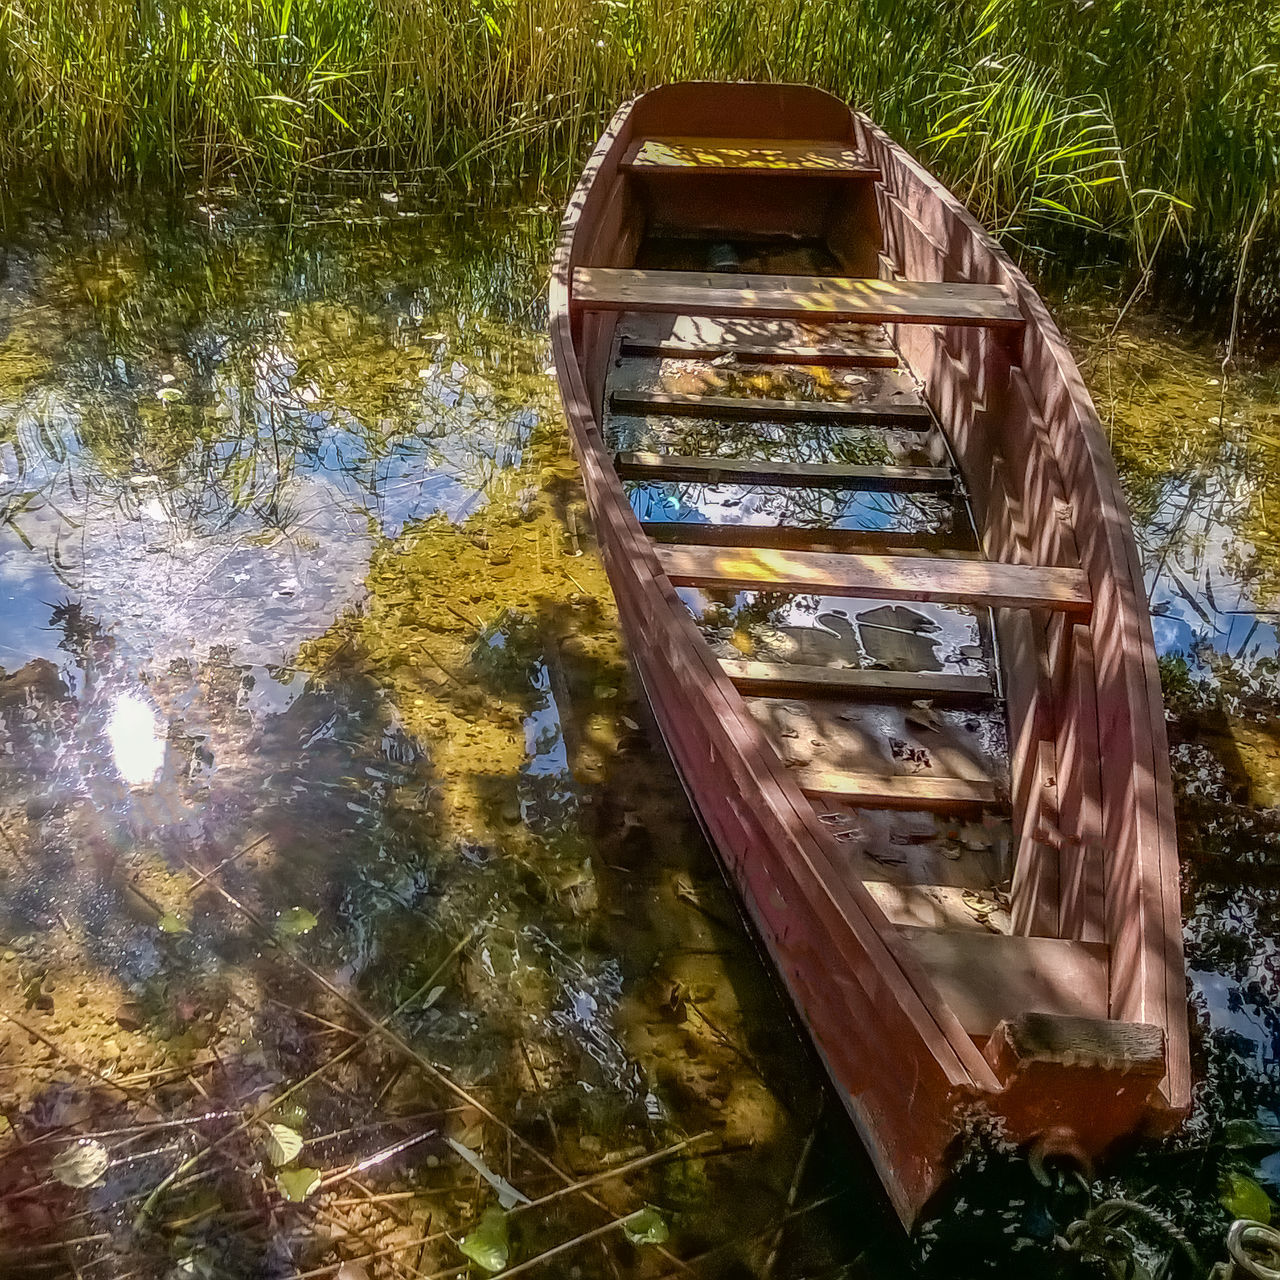 water, nature, plant, day, boat, no people, river, vehicle, waterway, nautical vessel, grass, reflection, abandoned, high angle view, outdoors, transportation, mode of transportation, land, watercraft, wood, moored, growth, tranquility, wetland, damaged, sunlight, pond